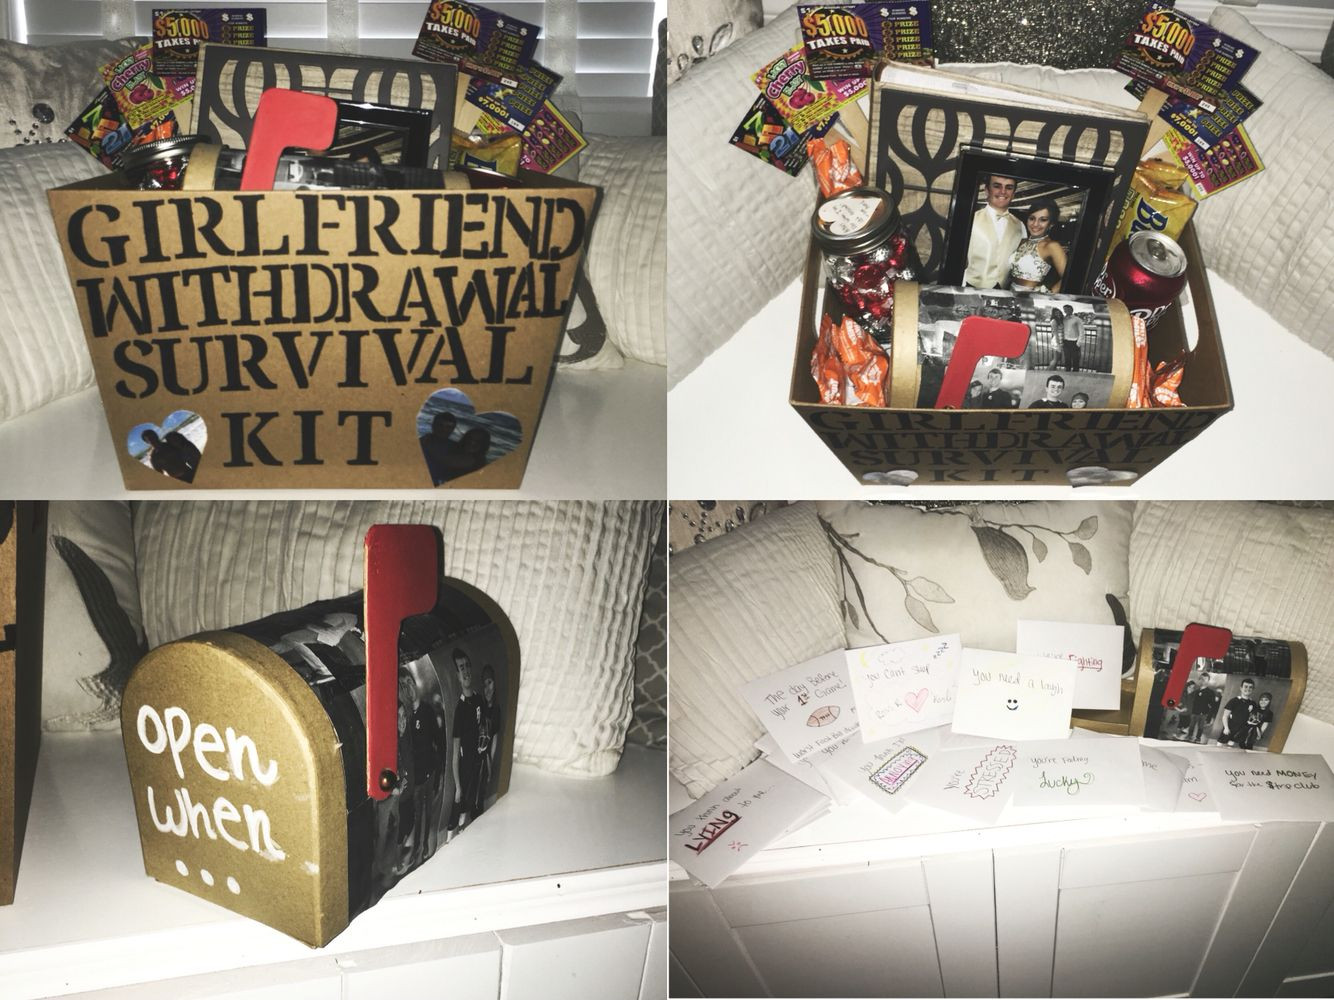 Cute Christmas Gift Ideas For Girlfriend
 Girlfriend withdrawal survival kit and open when letters